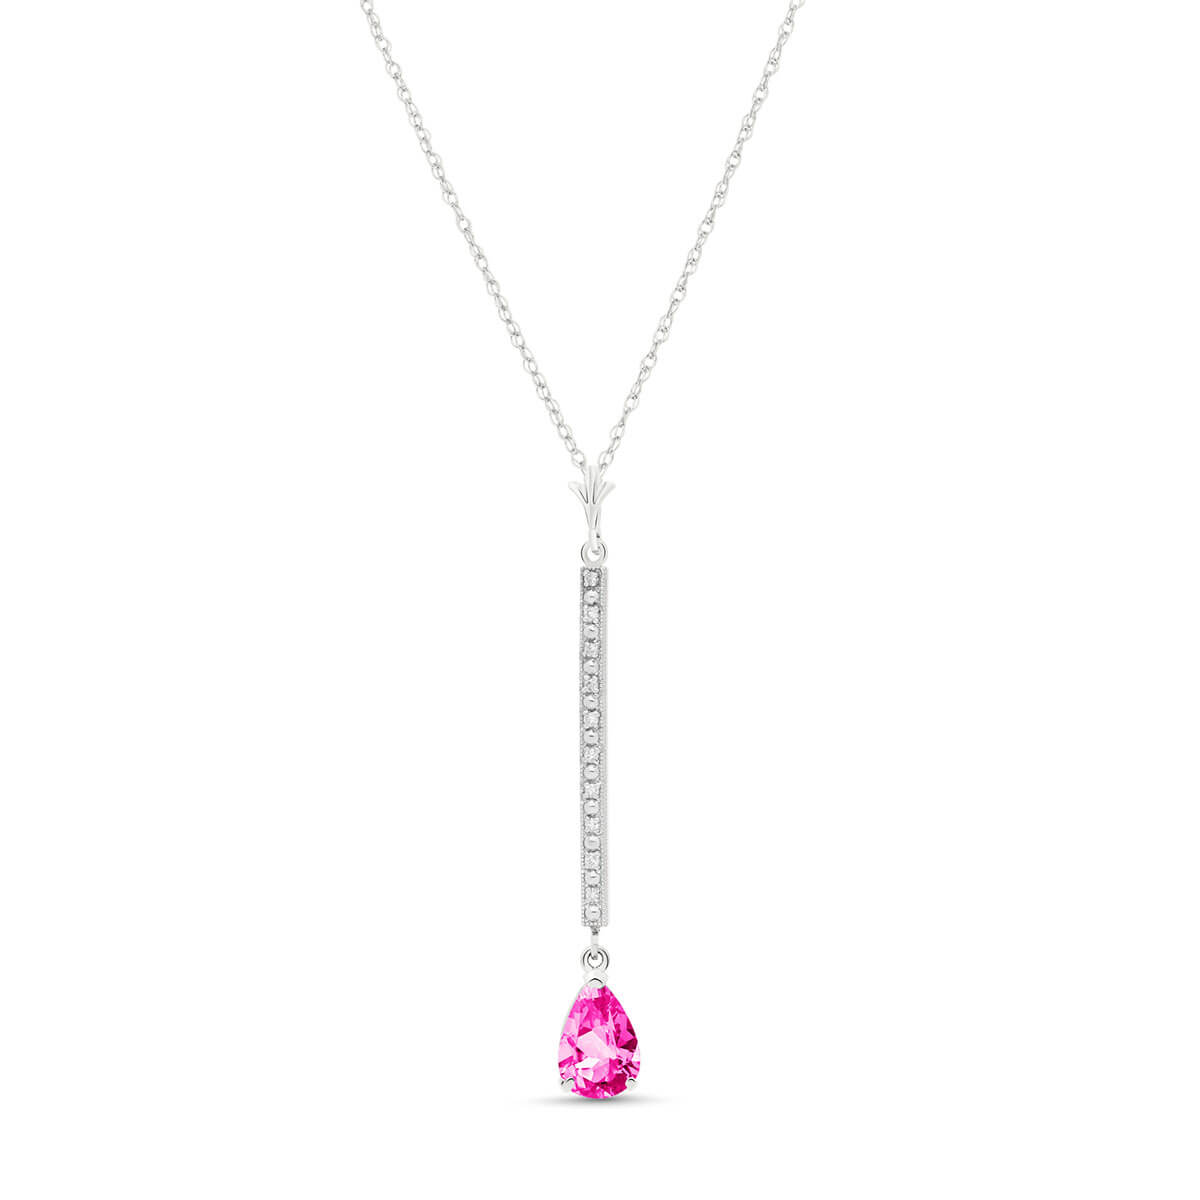 Pink Topaz & Diamond Bar Pendant Necklace in 9ct White Gold